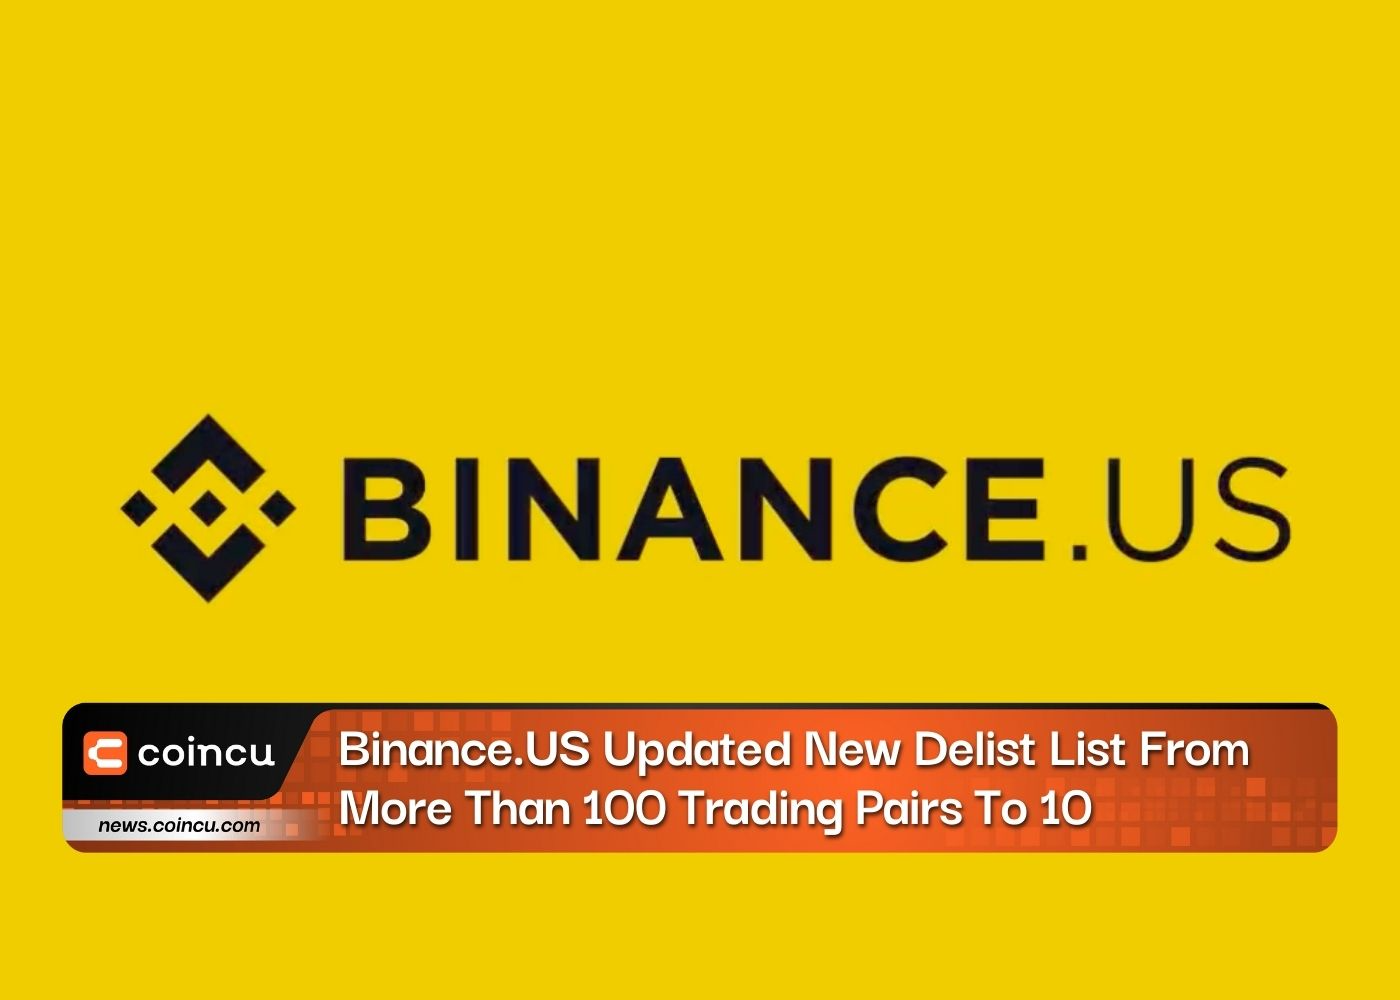 Binance.US Updated New Delist List From More Than 100 Trading Pairs To 10